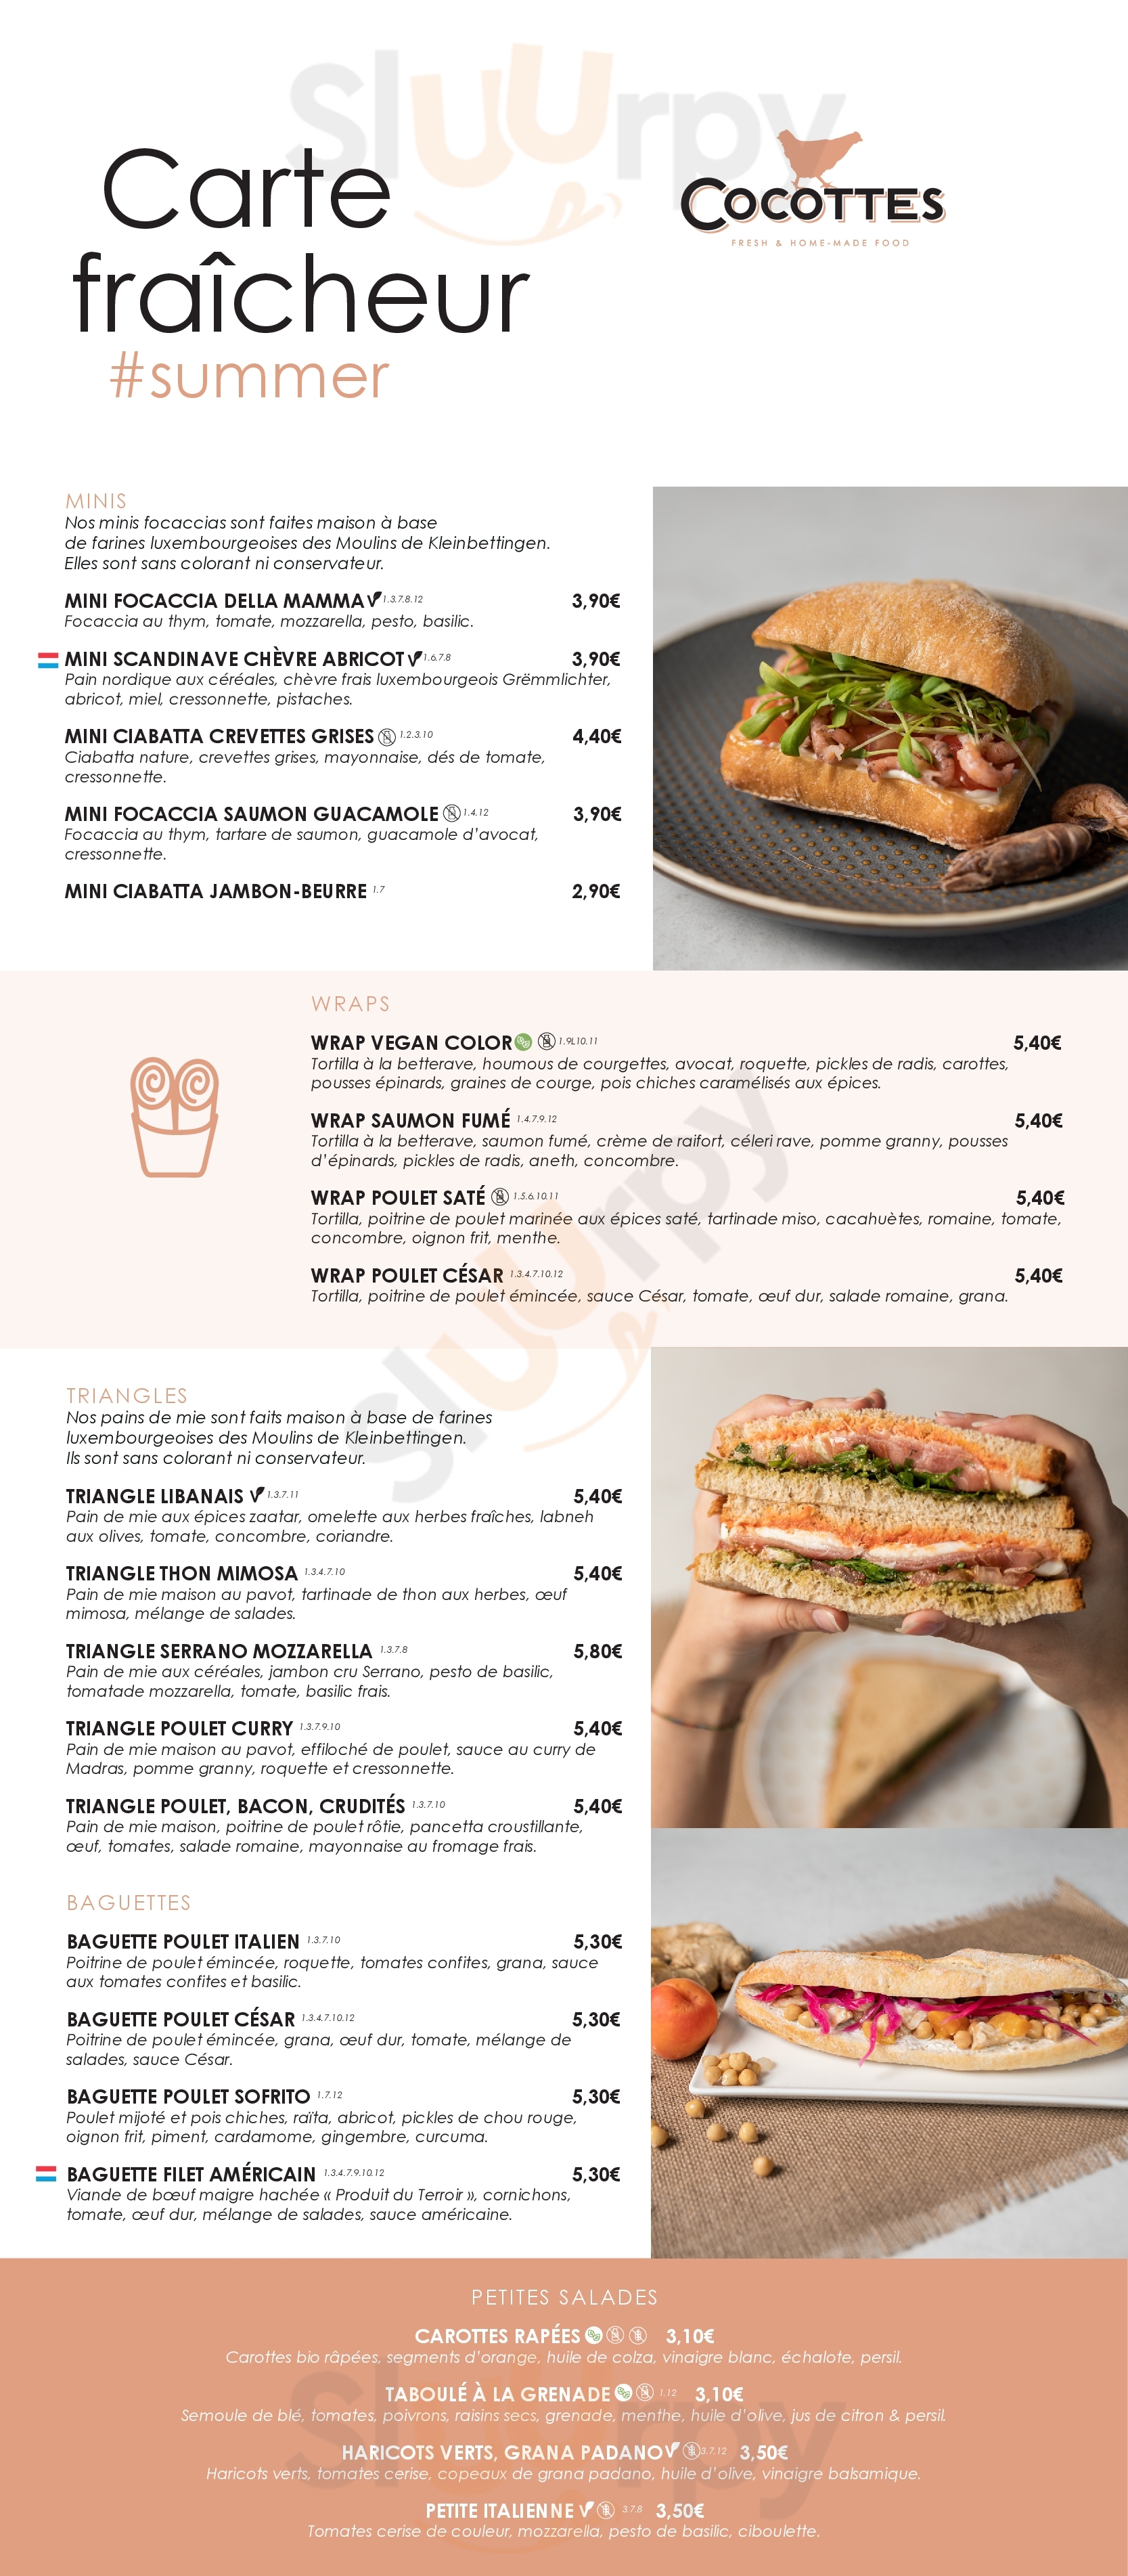 Cocottes Infinity Luxembourg Menu - 1